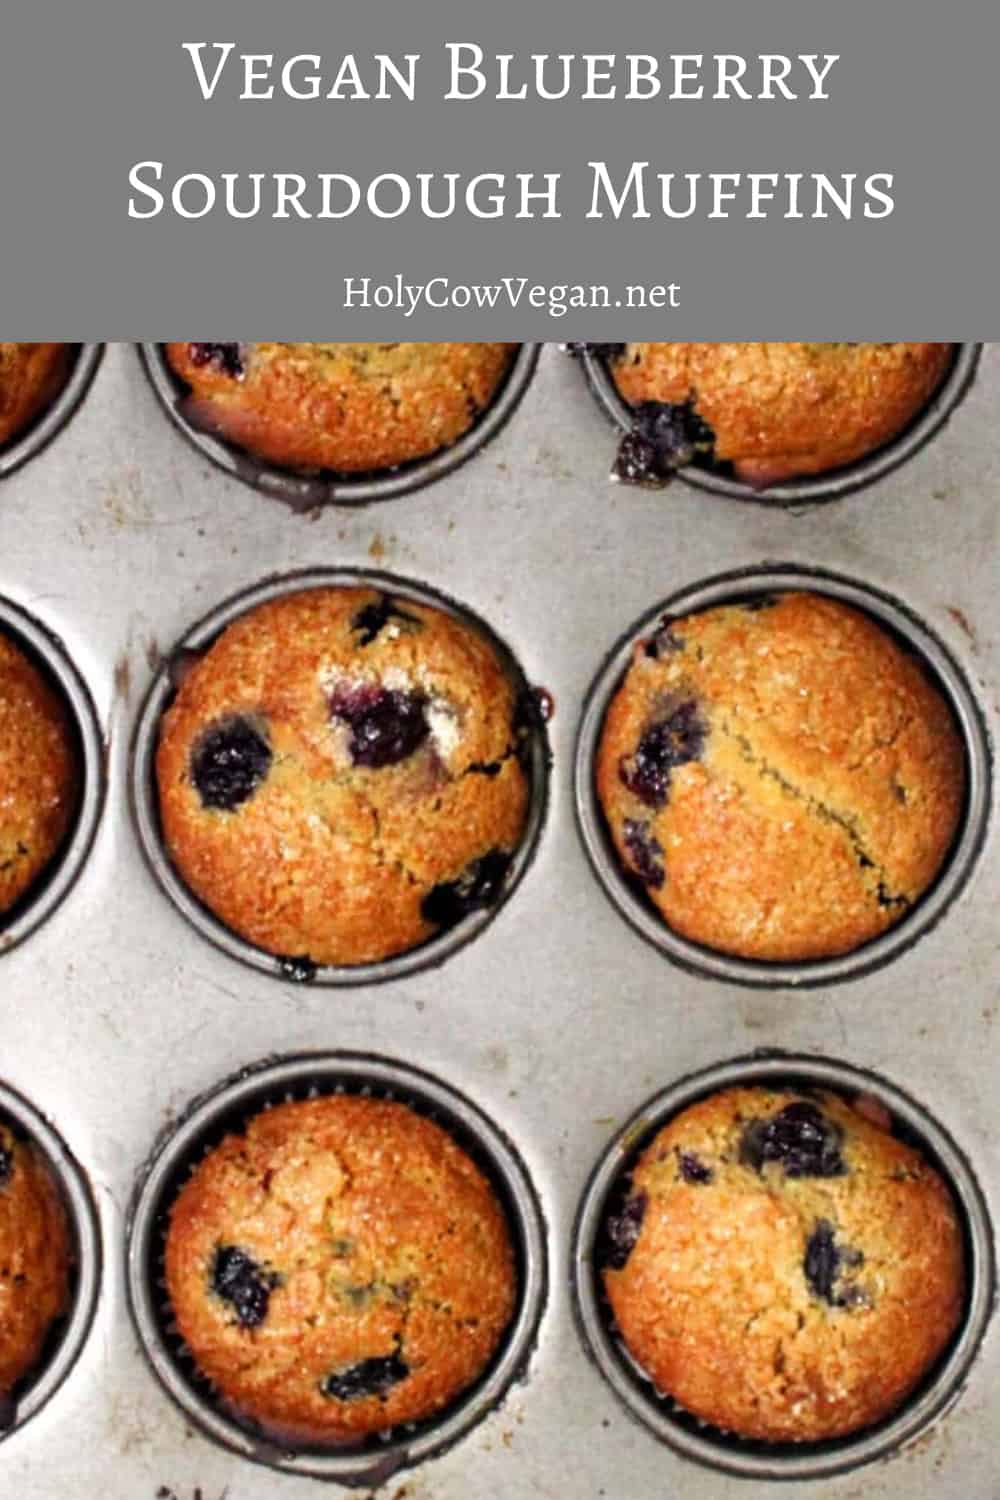 Vegan Blueberry Sourdough Muffins in a baking tin with pockets of blueberries